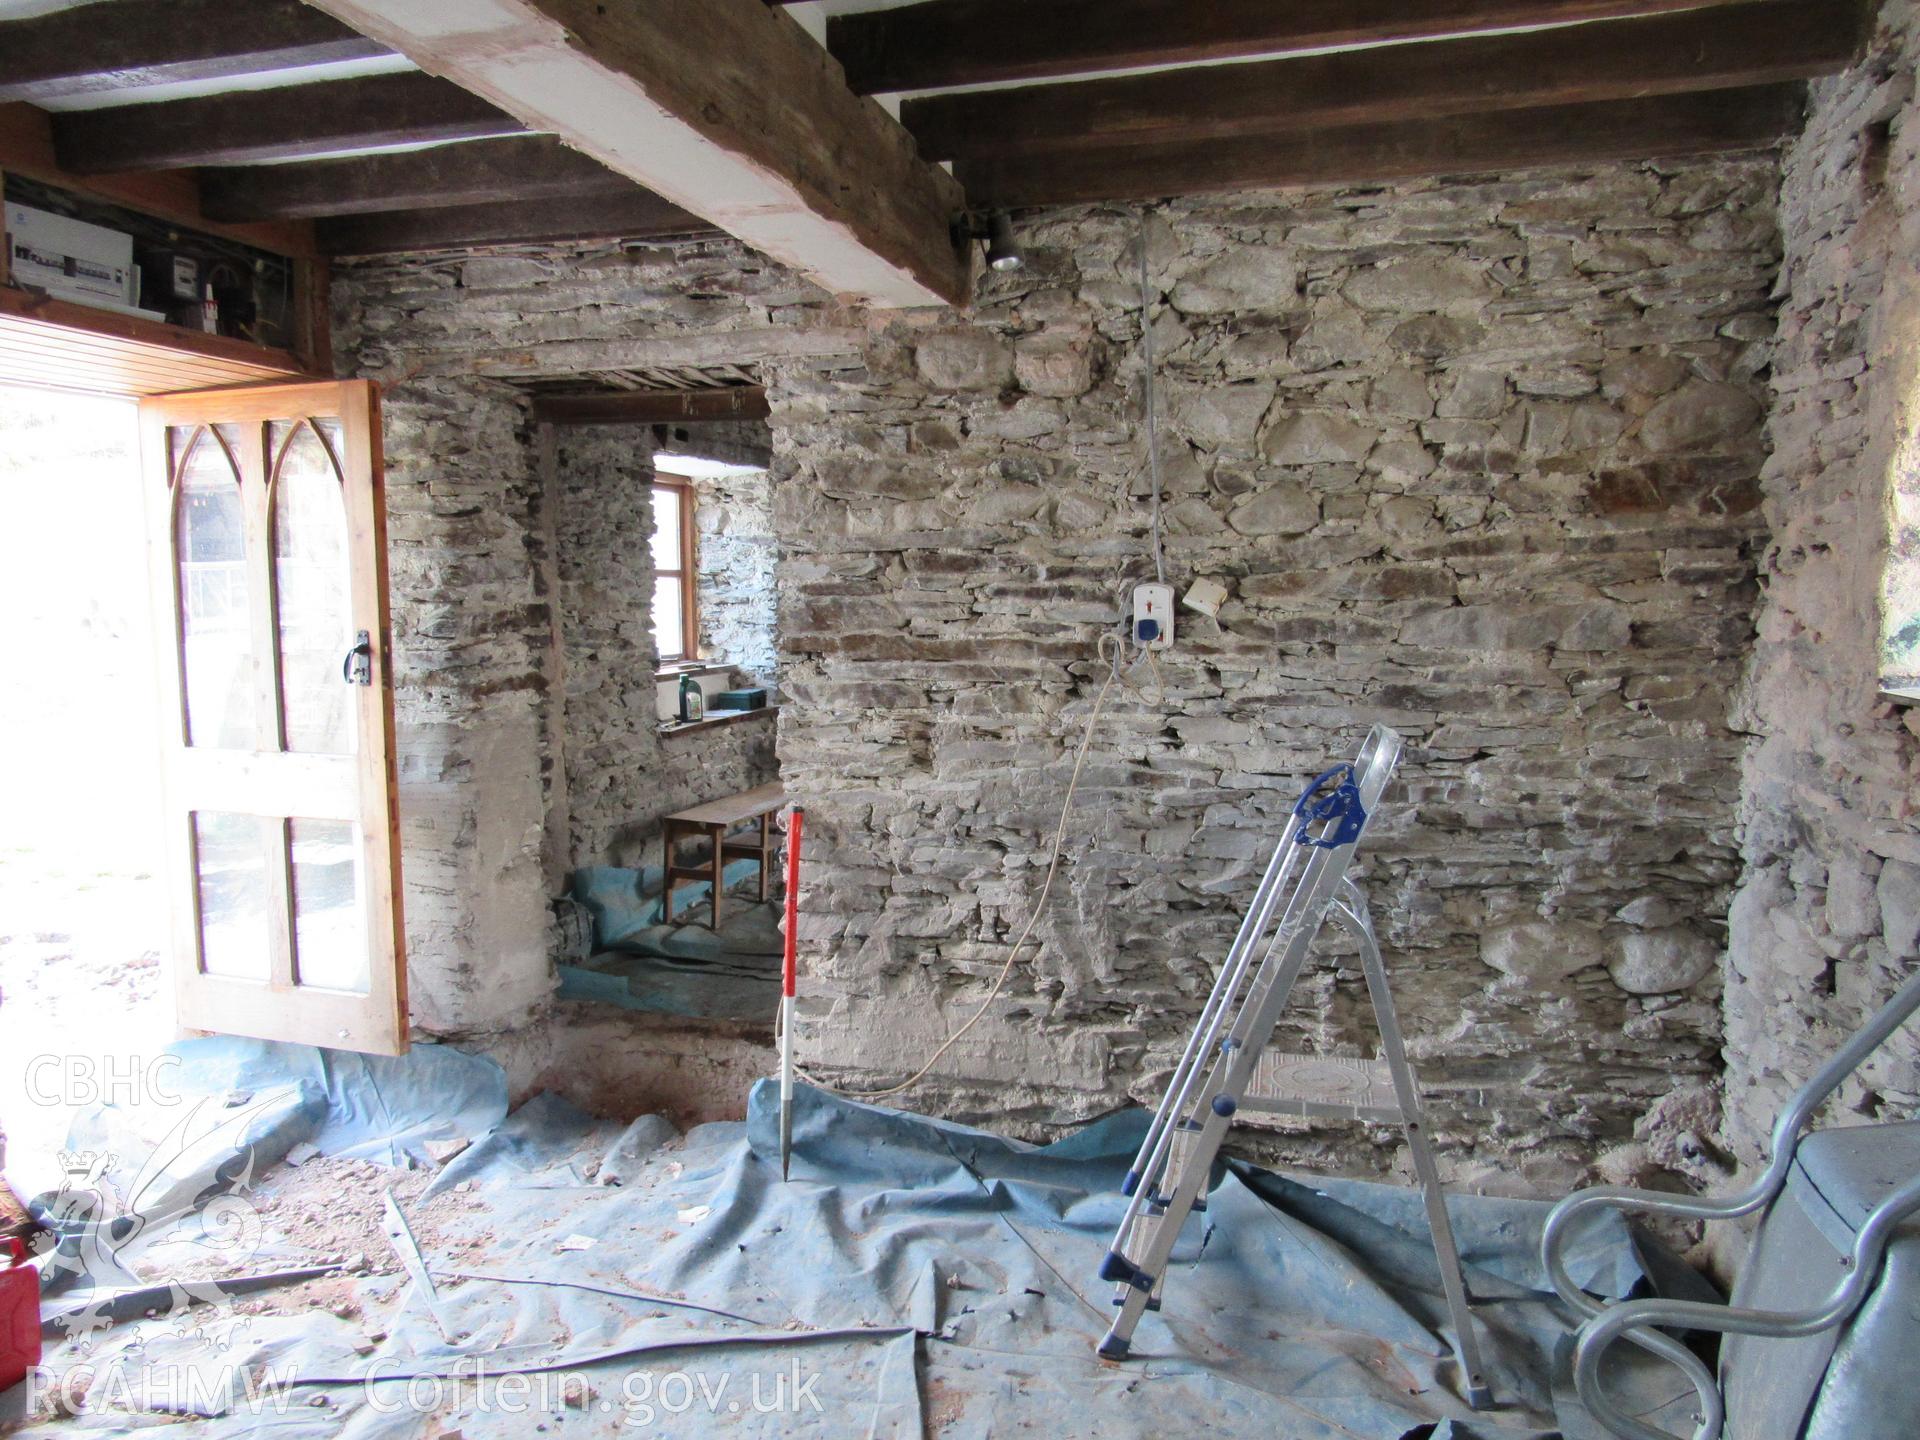 Kitchen in original house with doorway to lounge, view south-east. 1m scale. Photographed as part of archaeological building recording conducted at Bryn Ysguboriau, Llanelidan, Denbighshire, carried out by Archaeology Wales, 2018. Project no. P2587.